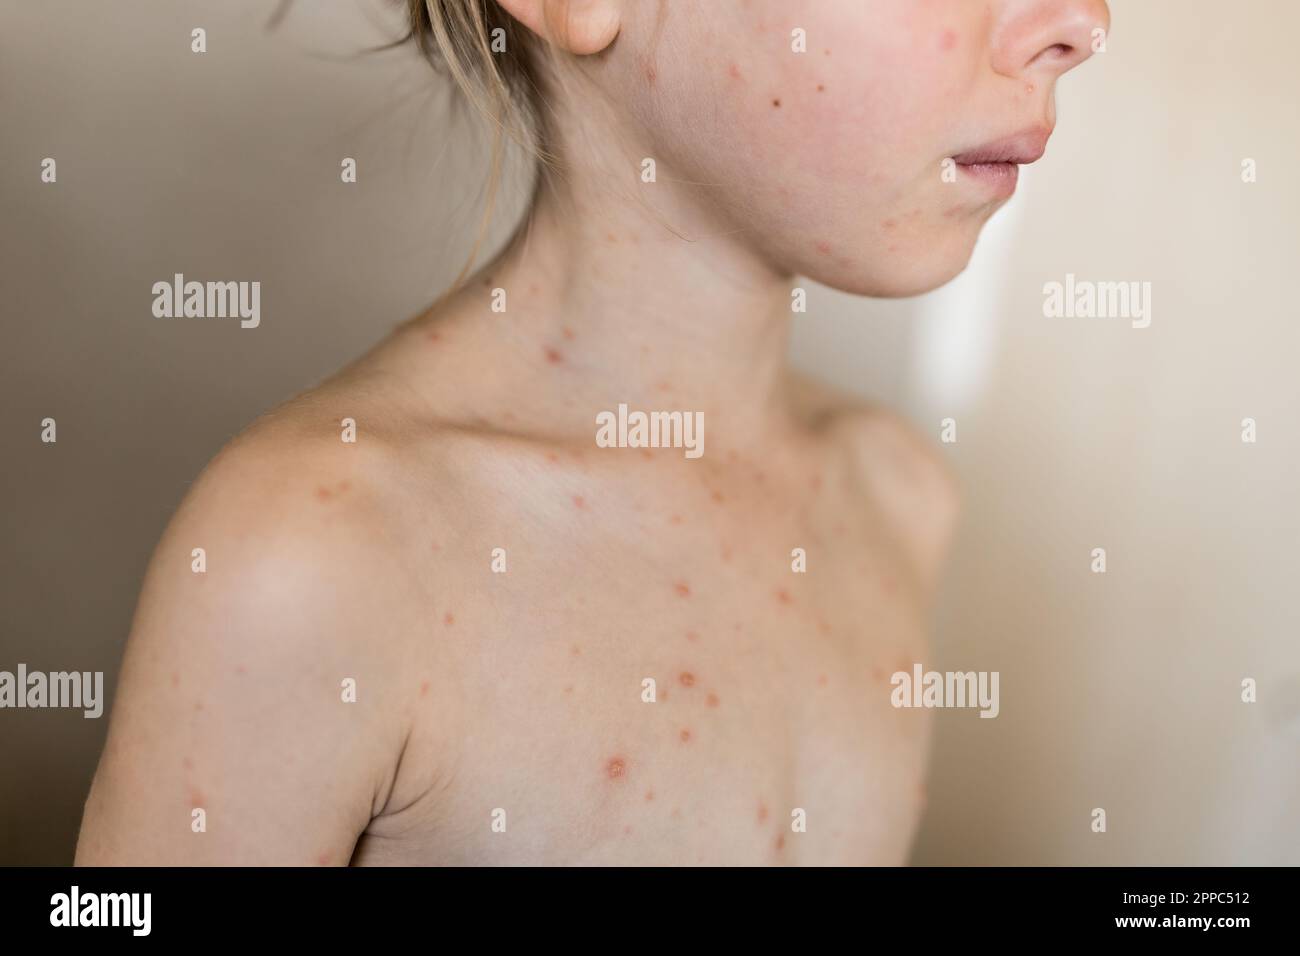 Chickenpox, varicella virus or vesicular rash on little girl body and face. Close-up Portrait of Kid with red pimples. Obscured face of child Stock Photo